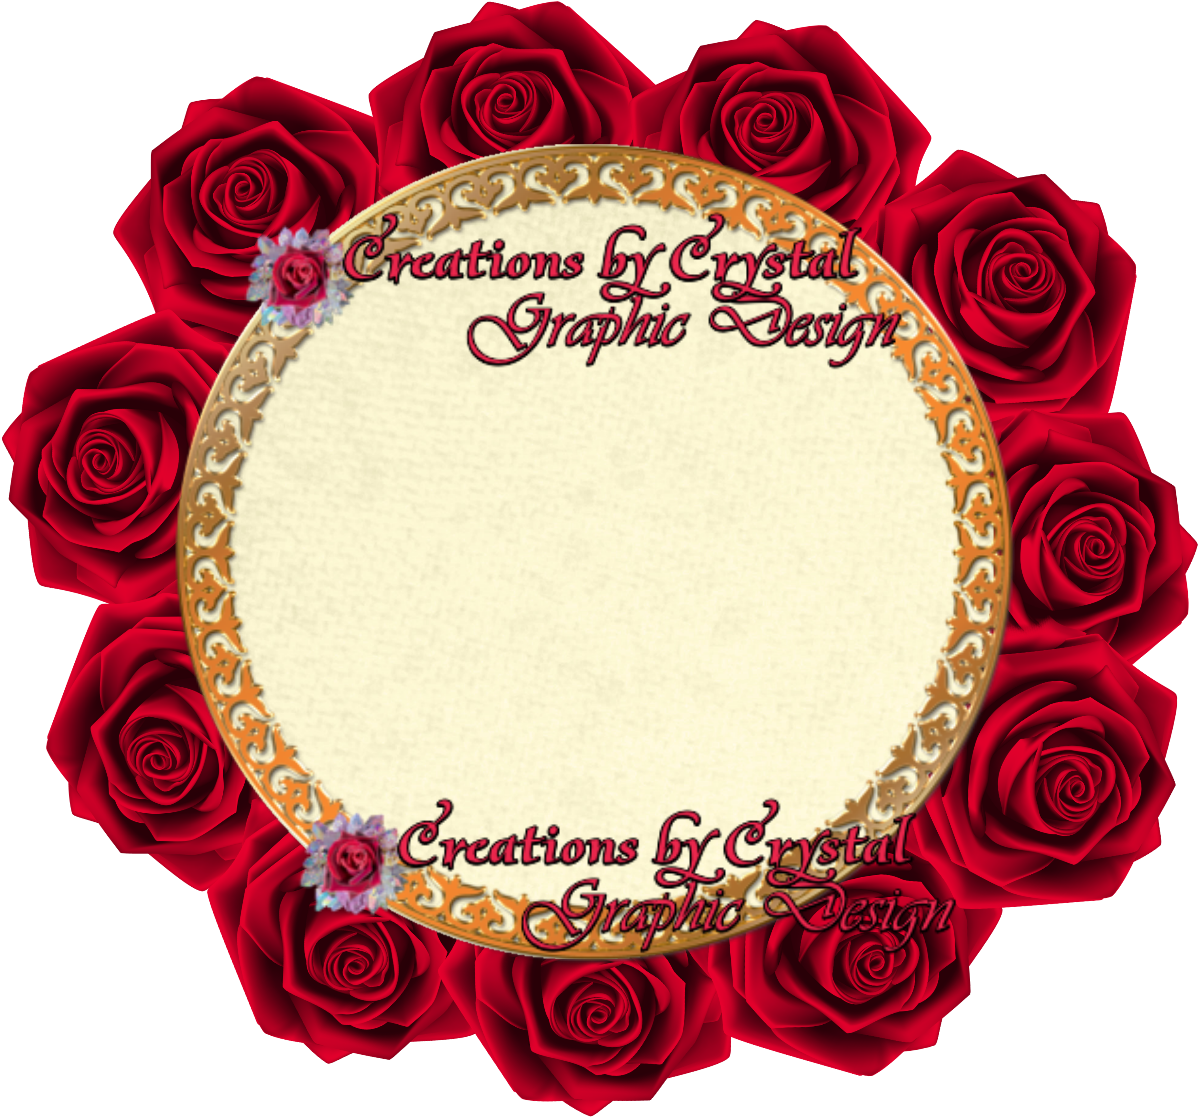 35 Borders And Corners Floral Designs Entire Package - Graphic Design (1200x1200)